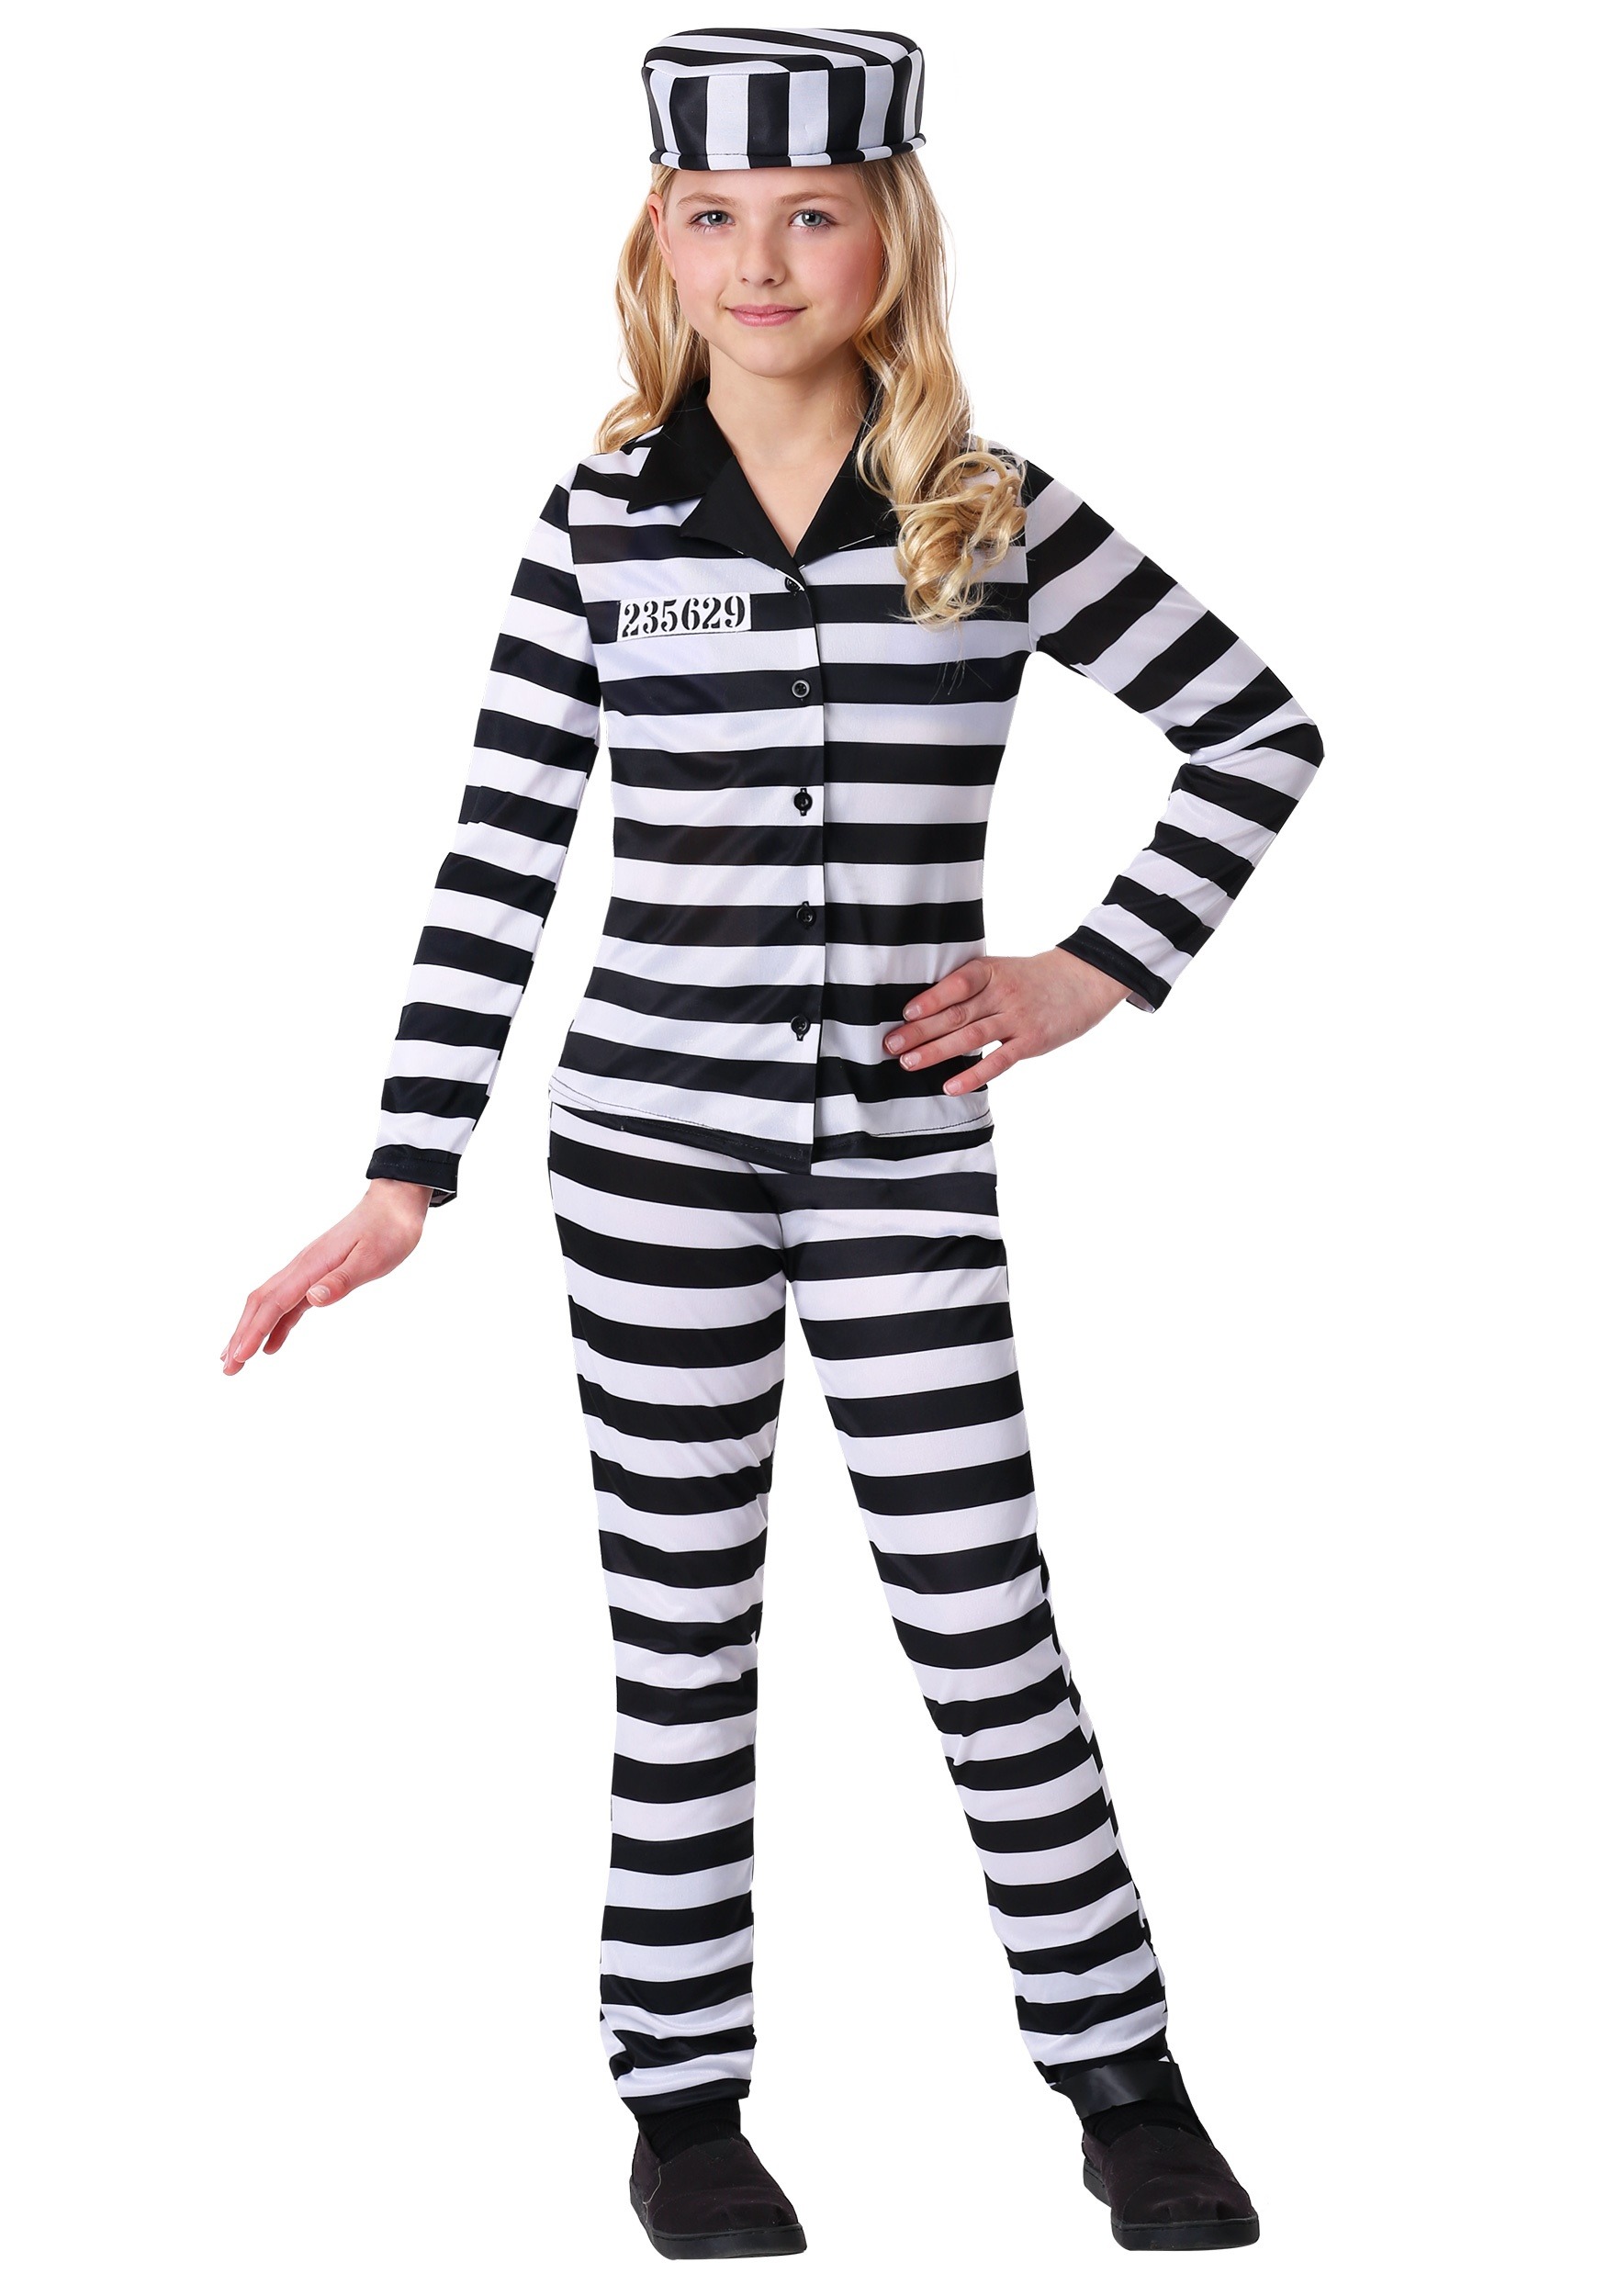 Incarcerated Cutie Costume for Girls